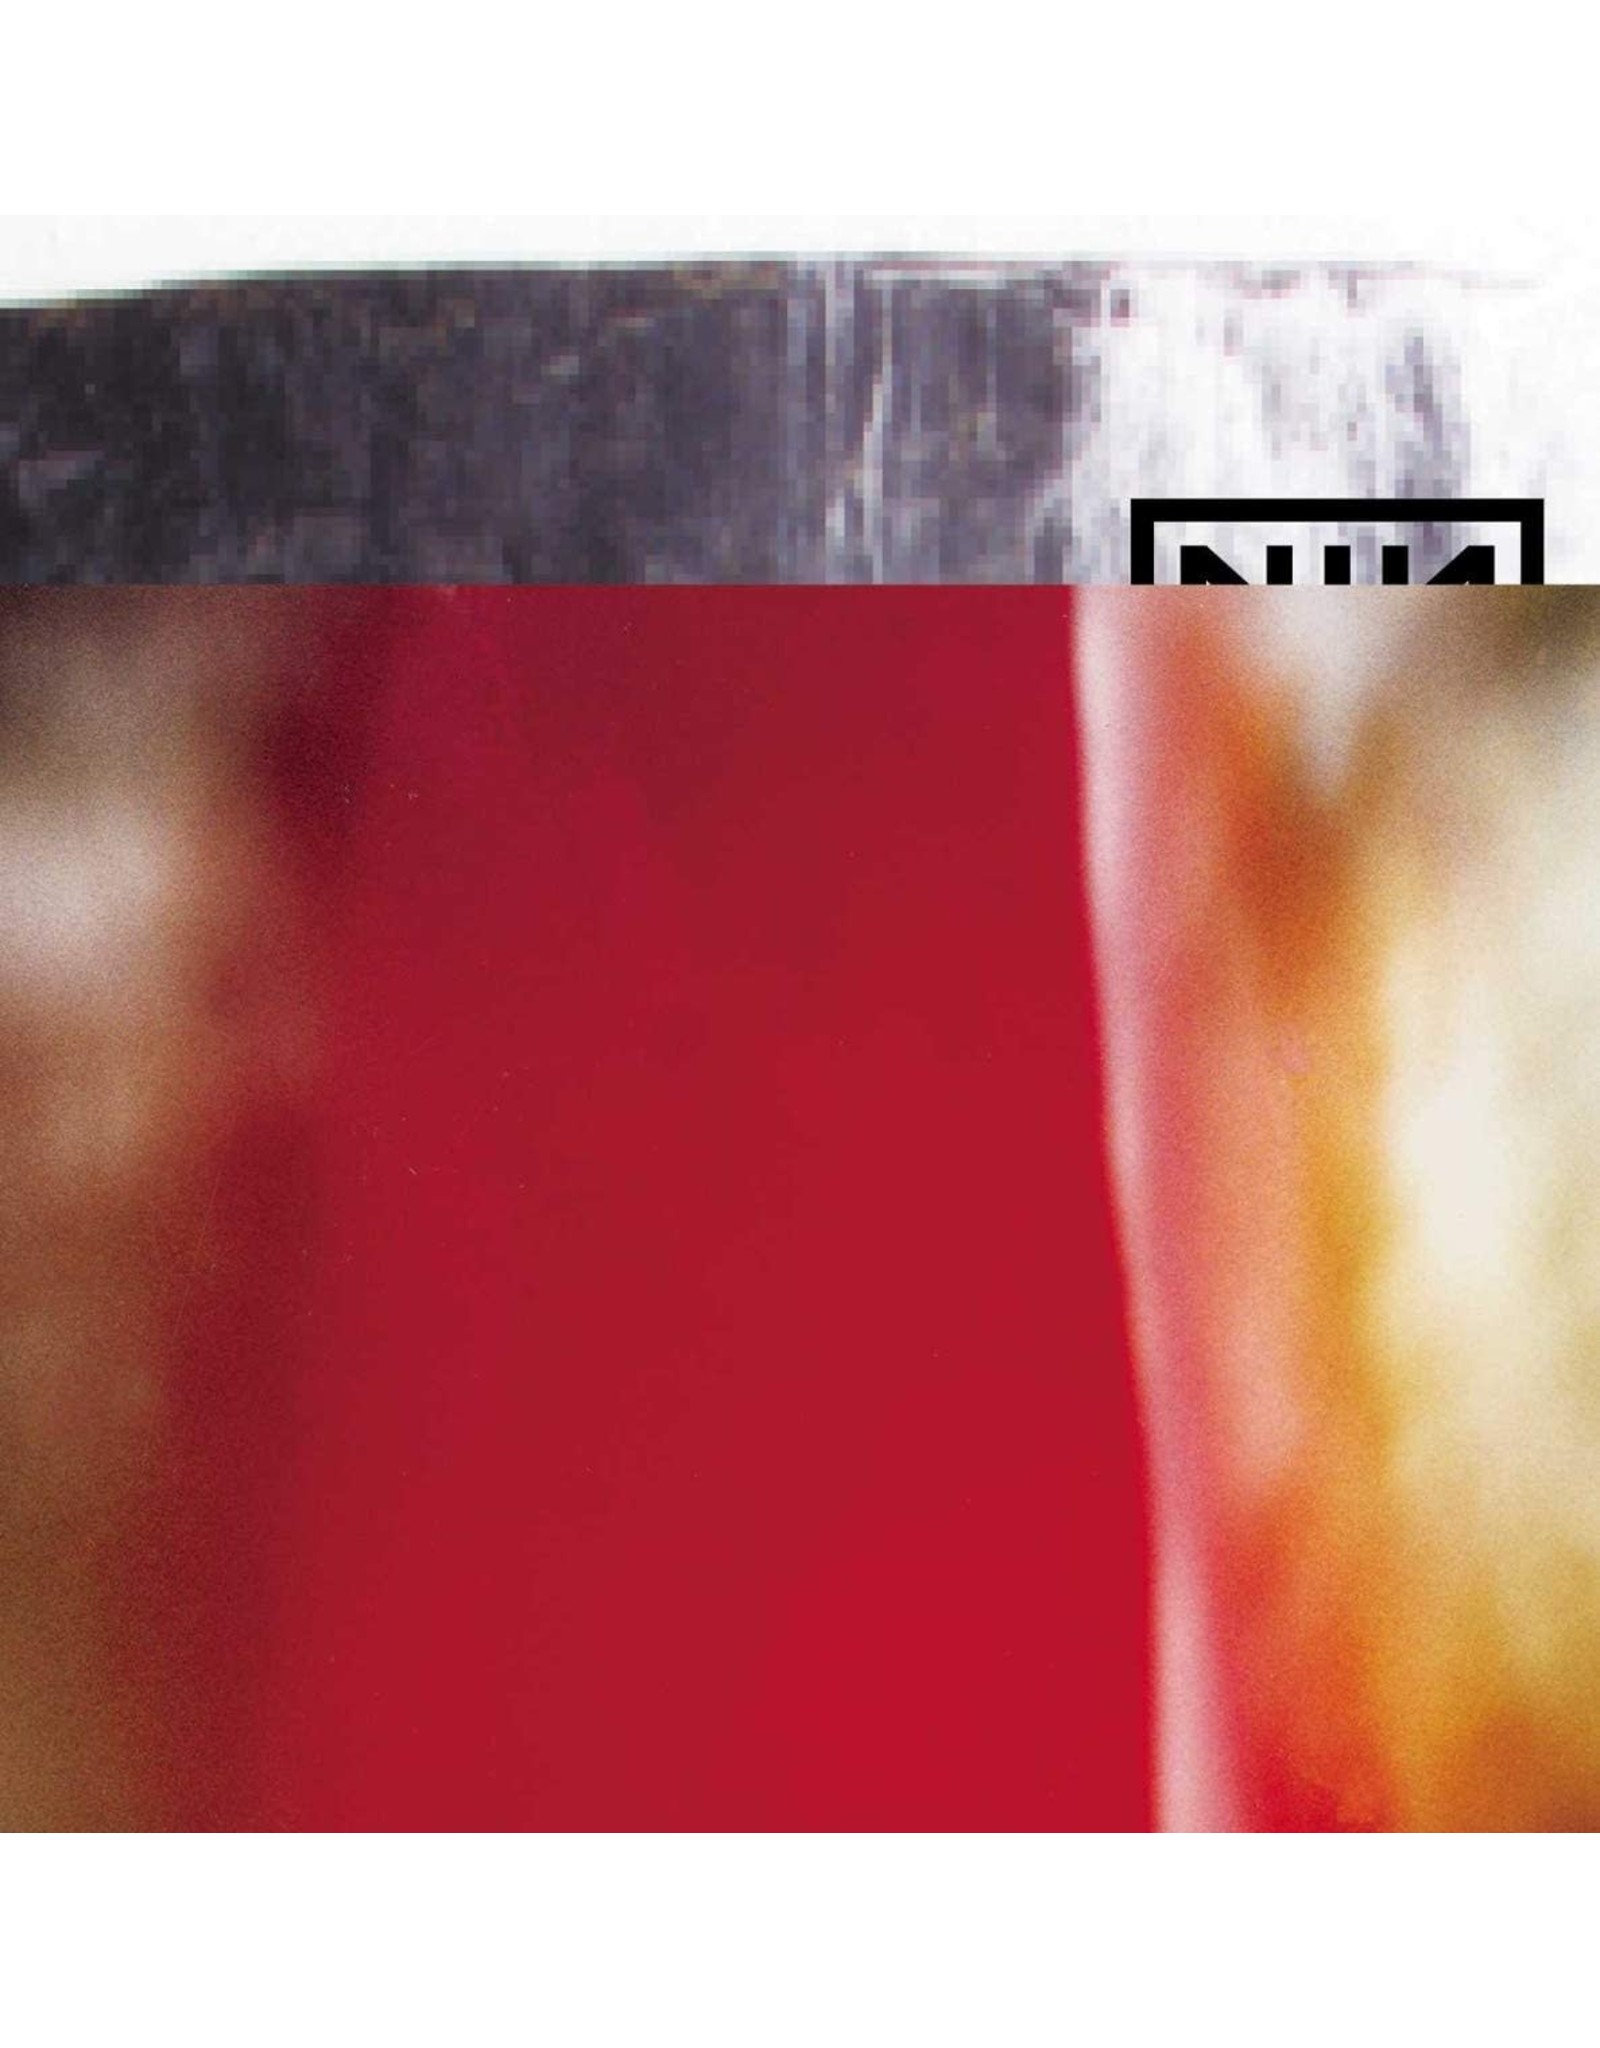 Nothing Nine Inch Nails: The Fragile  LP